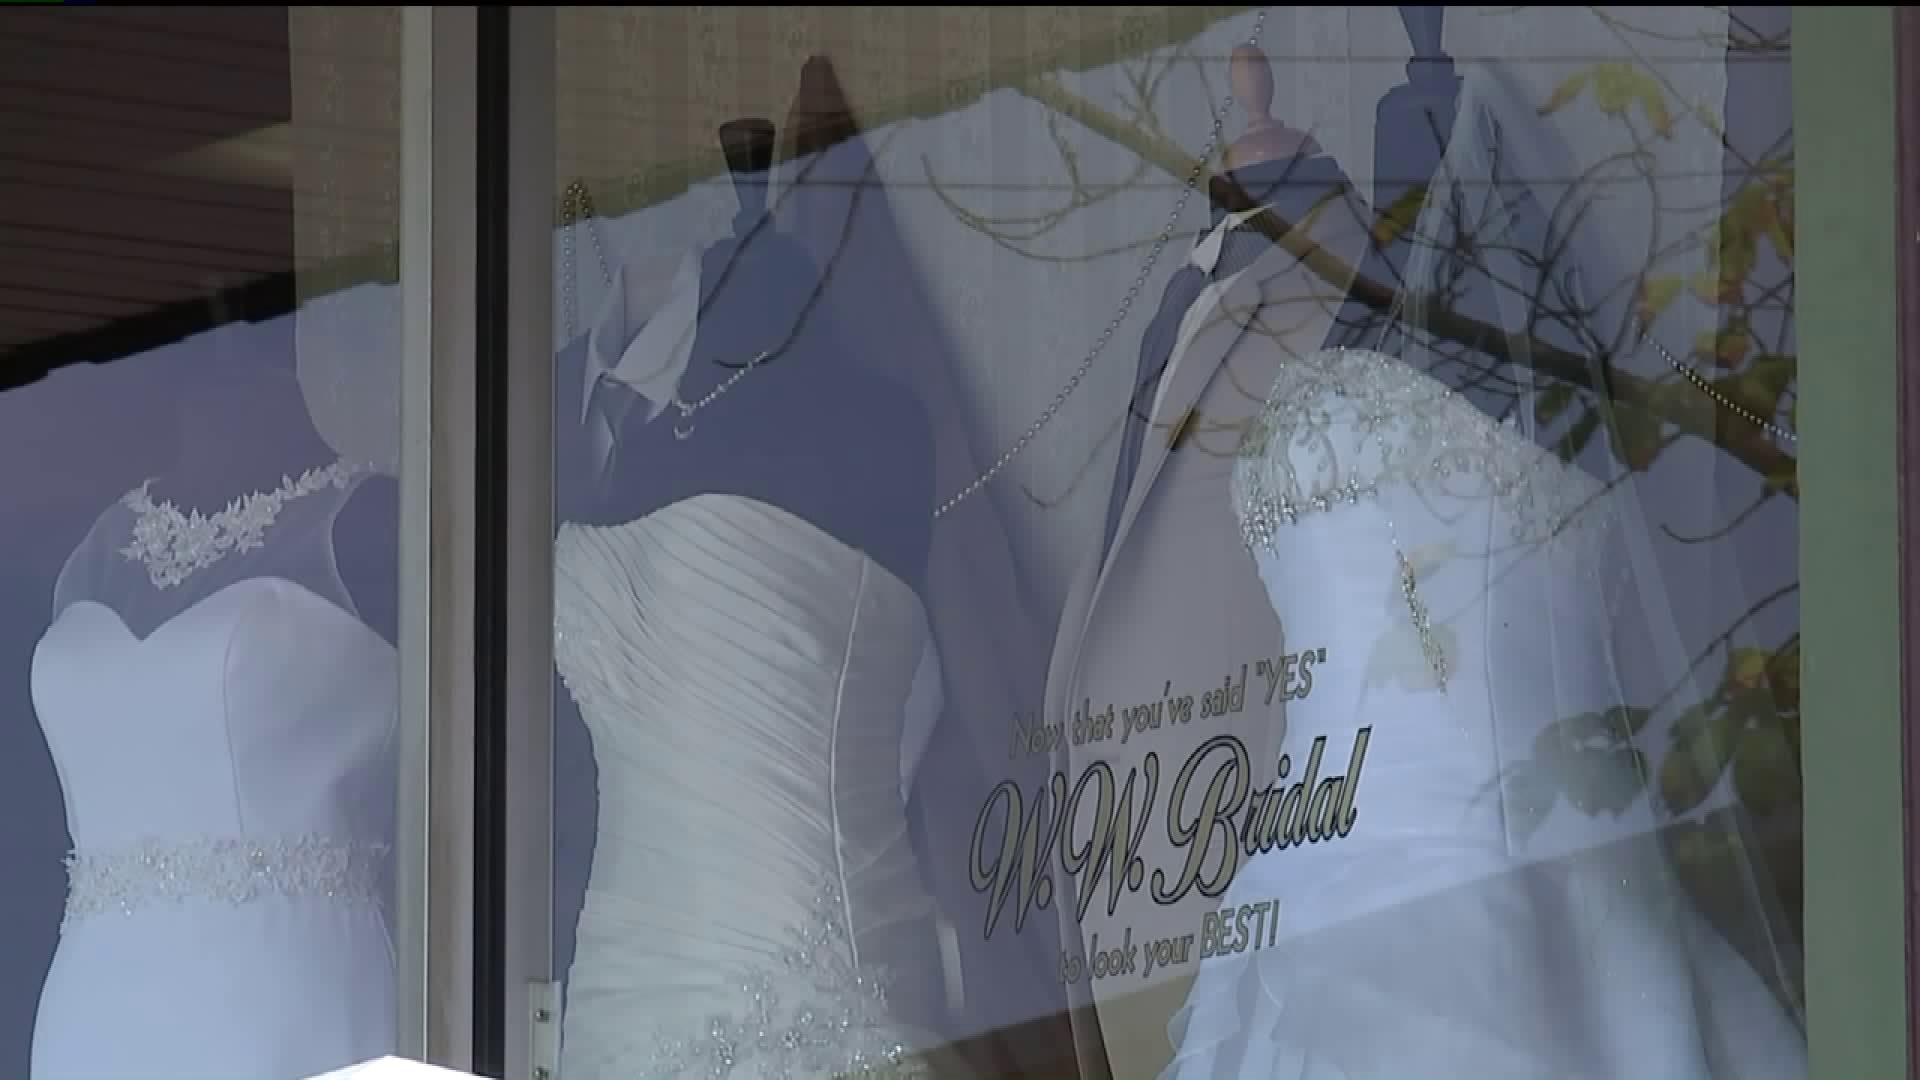 Bridal Shop Owners Get Death Threats Over Same-Sex Policy